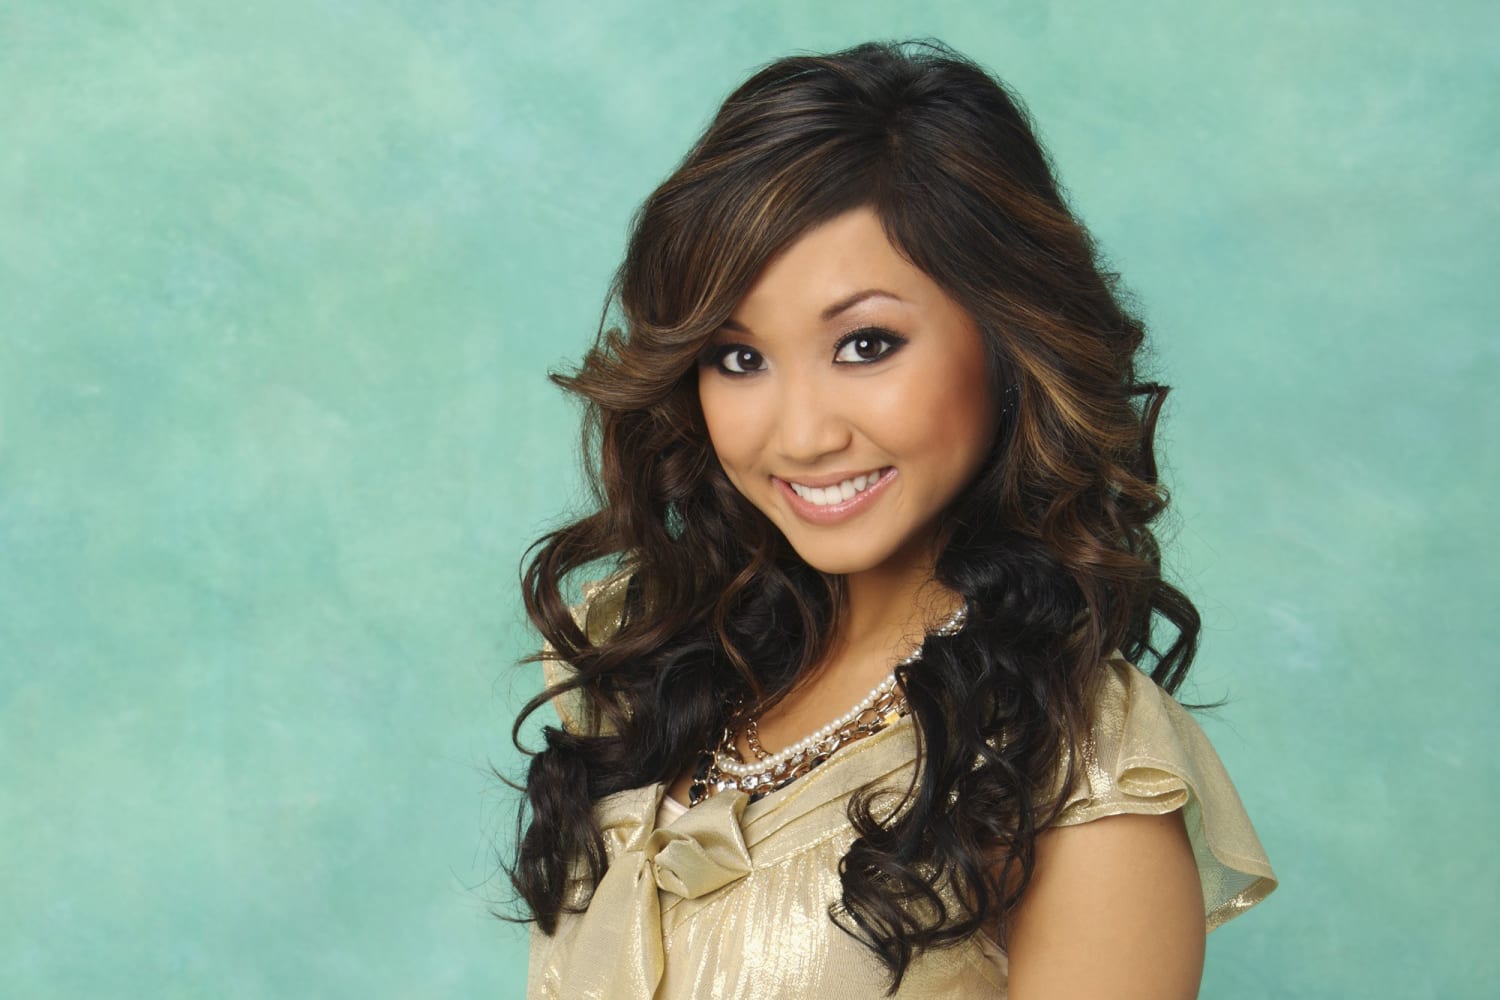 From Avatar to London Tipton, Asian Americans look back on characters that shaped their self-image